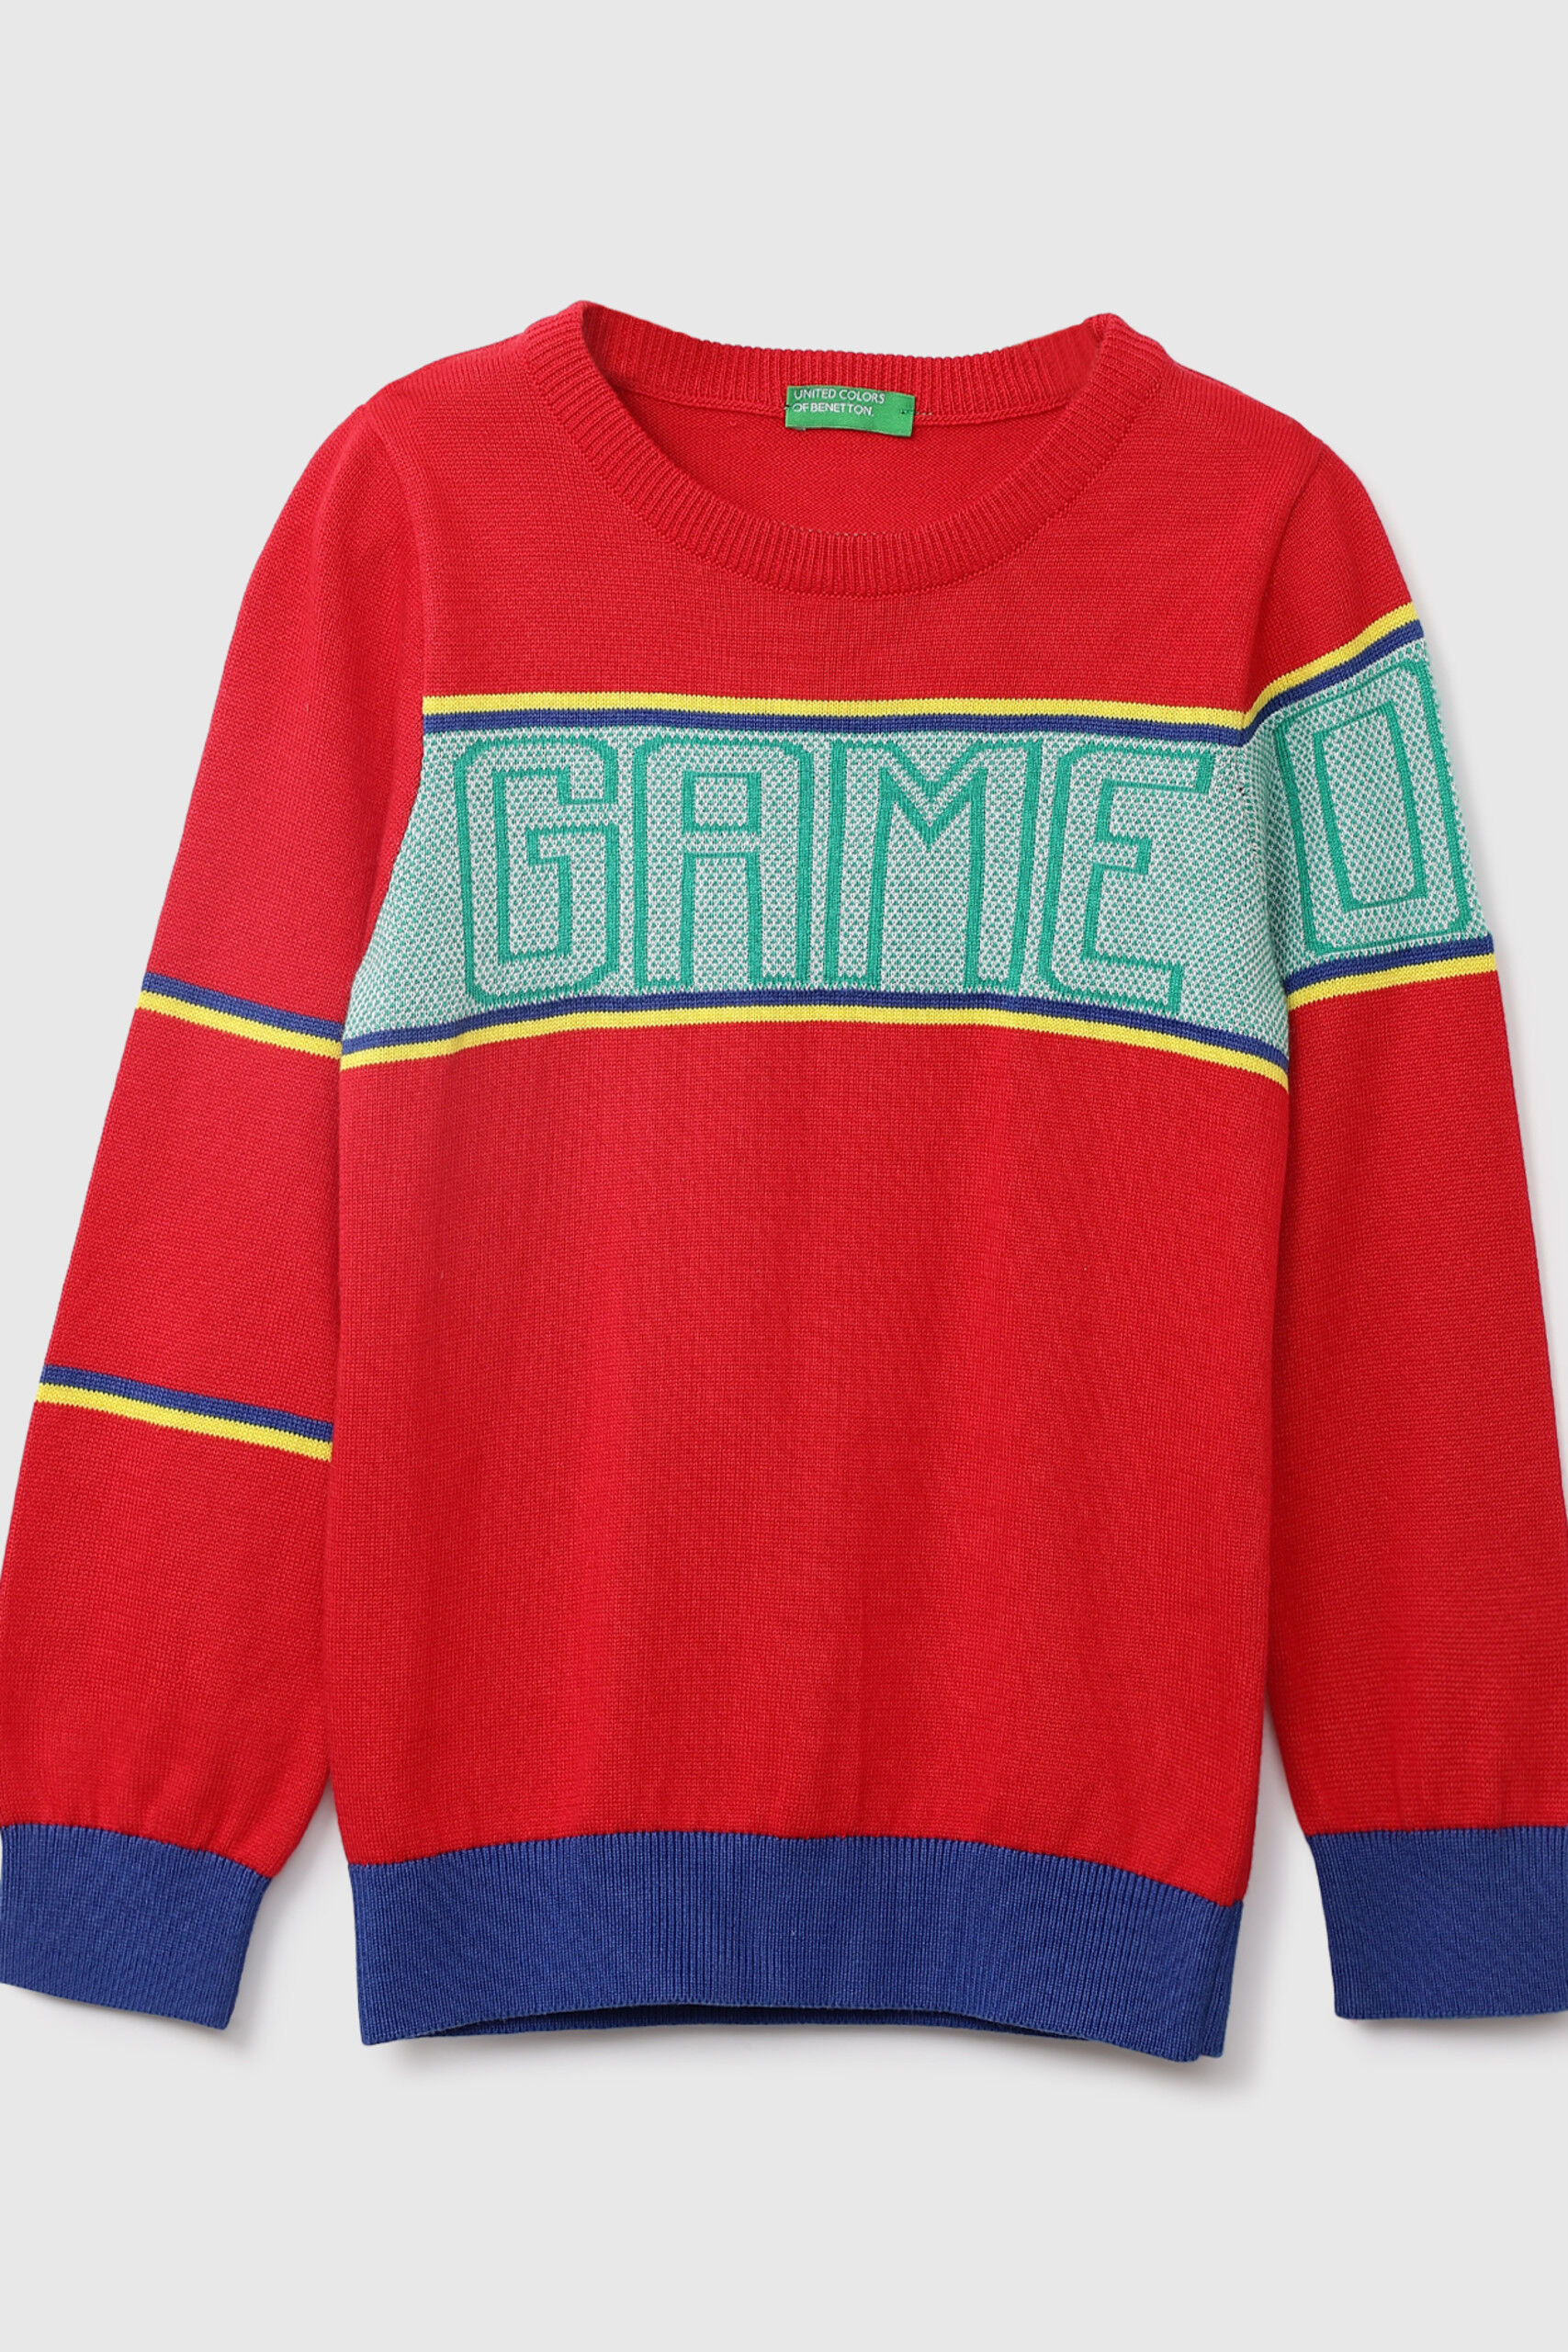 Junior Boys' Sweaters New Collection 2021 | Benetton